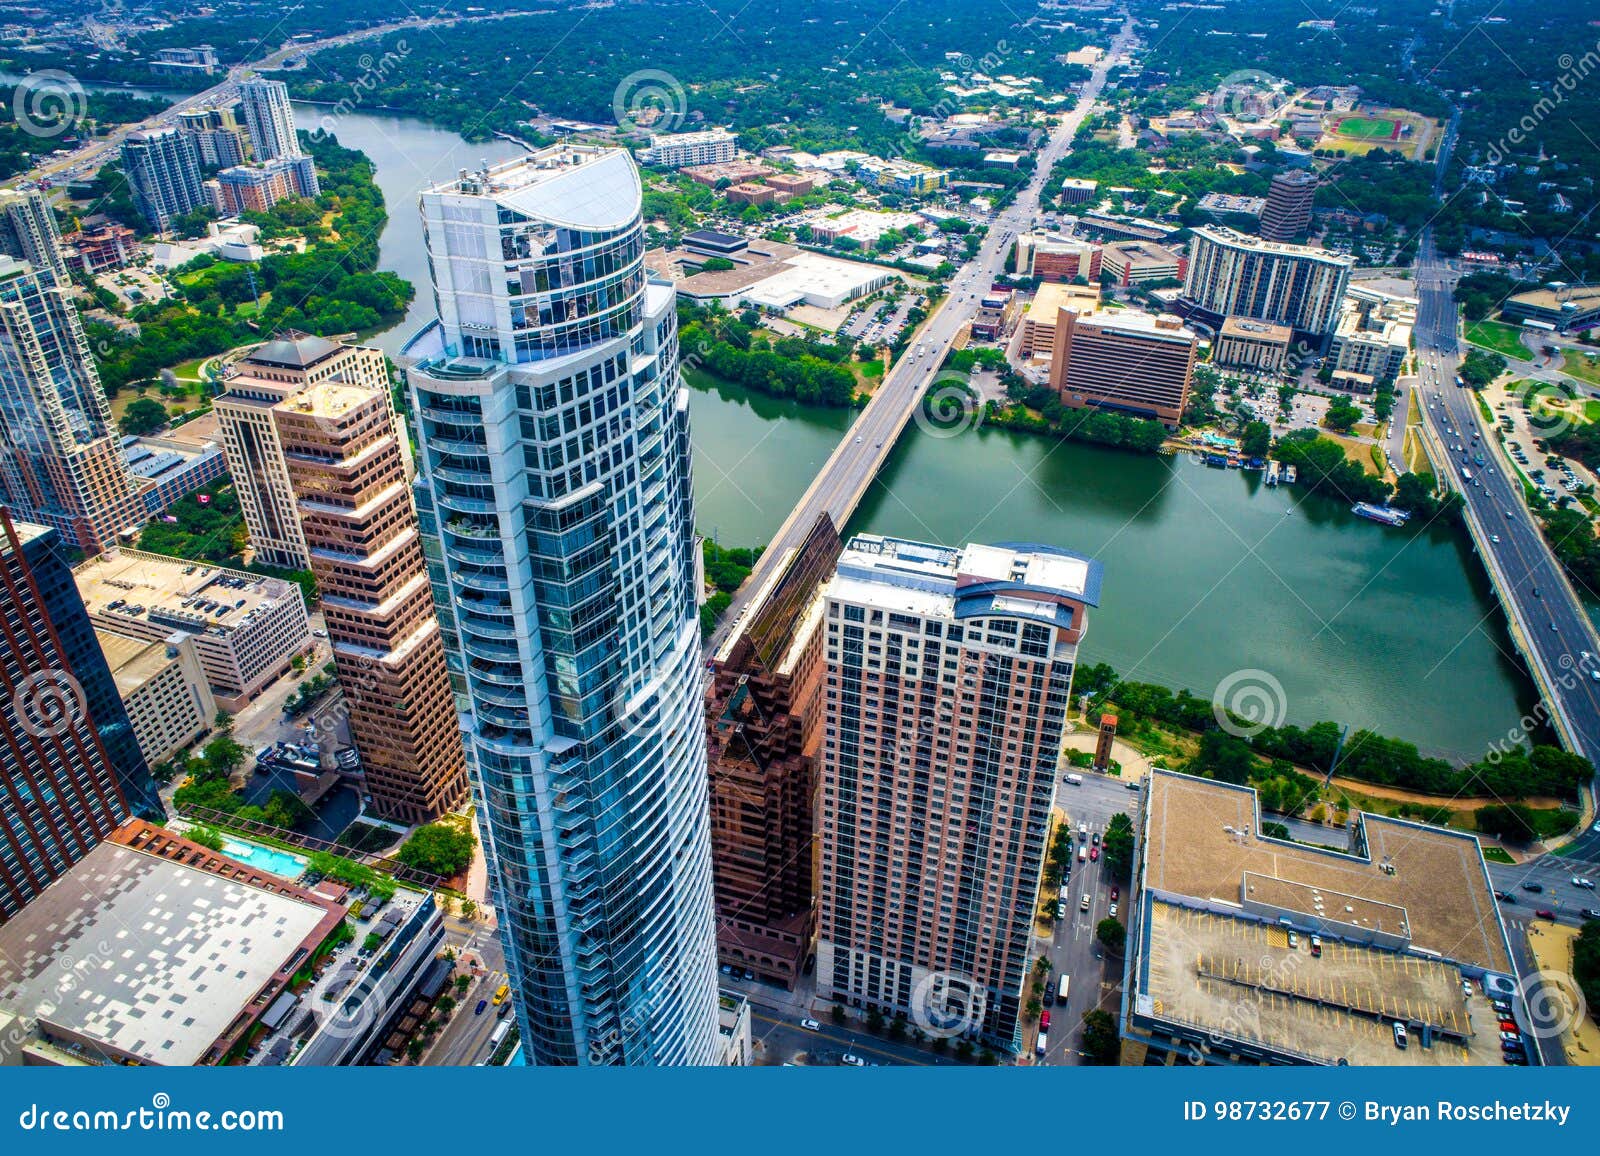 high above austin texas tallest tower looking down congress avenue high aerial drone view